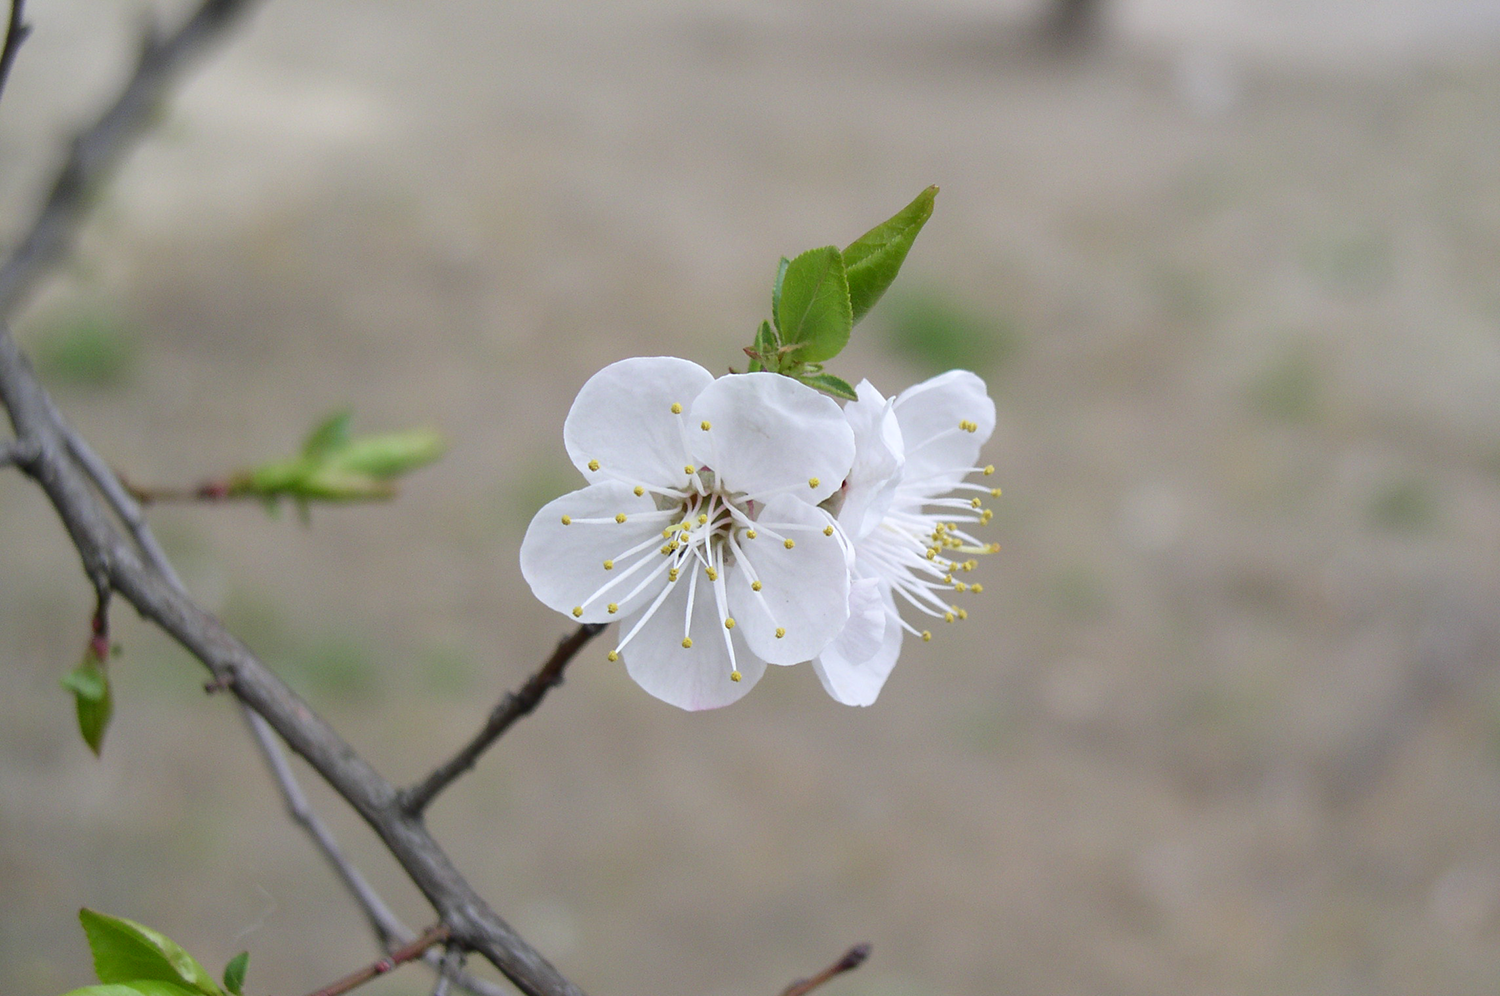 apple blossom on a branch with small budded leaves